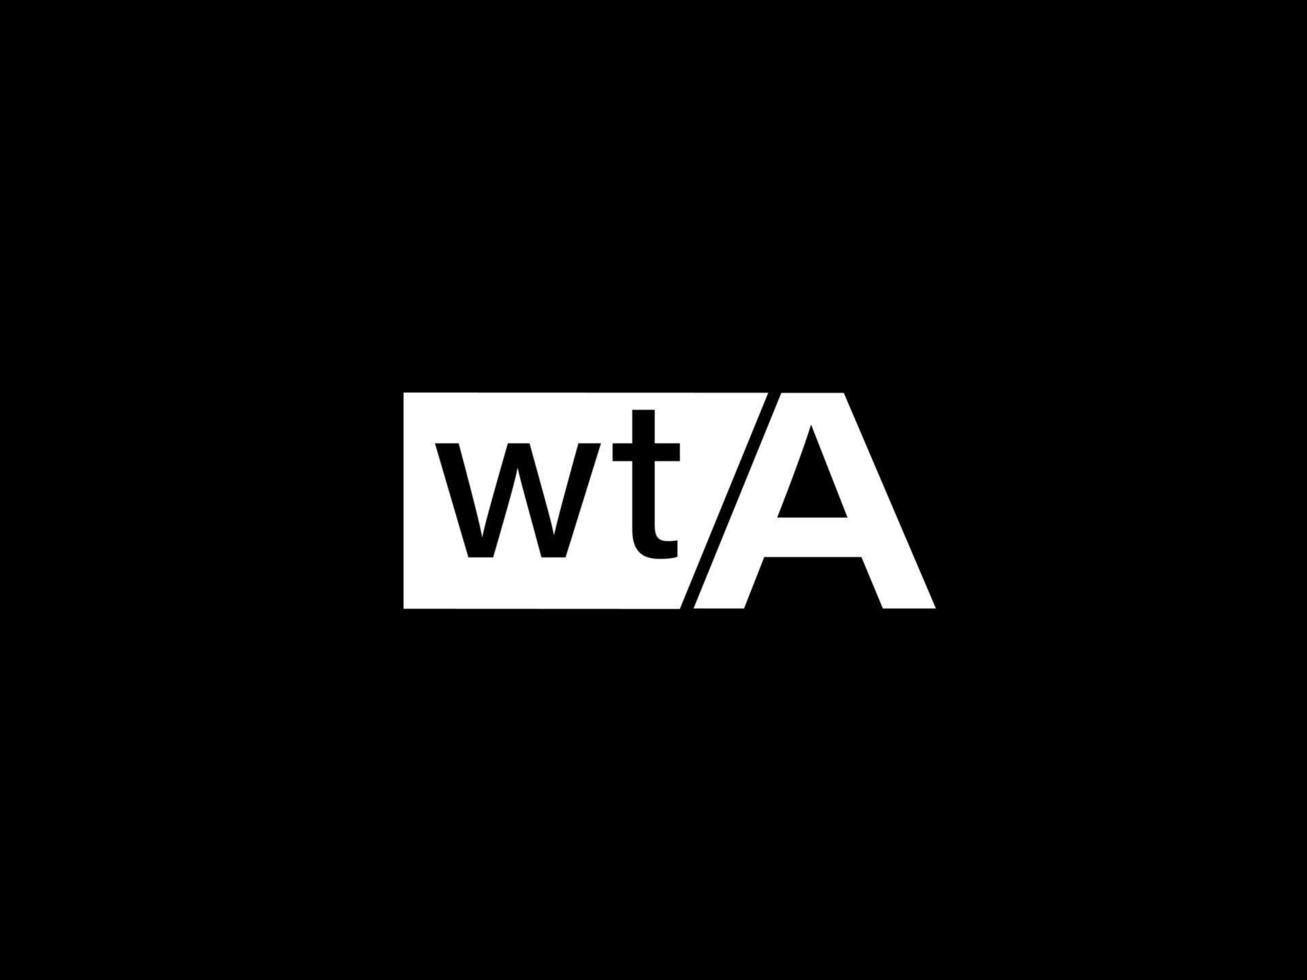 WTA Logo and Graphics design vector art, Icons isolated on black background